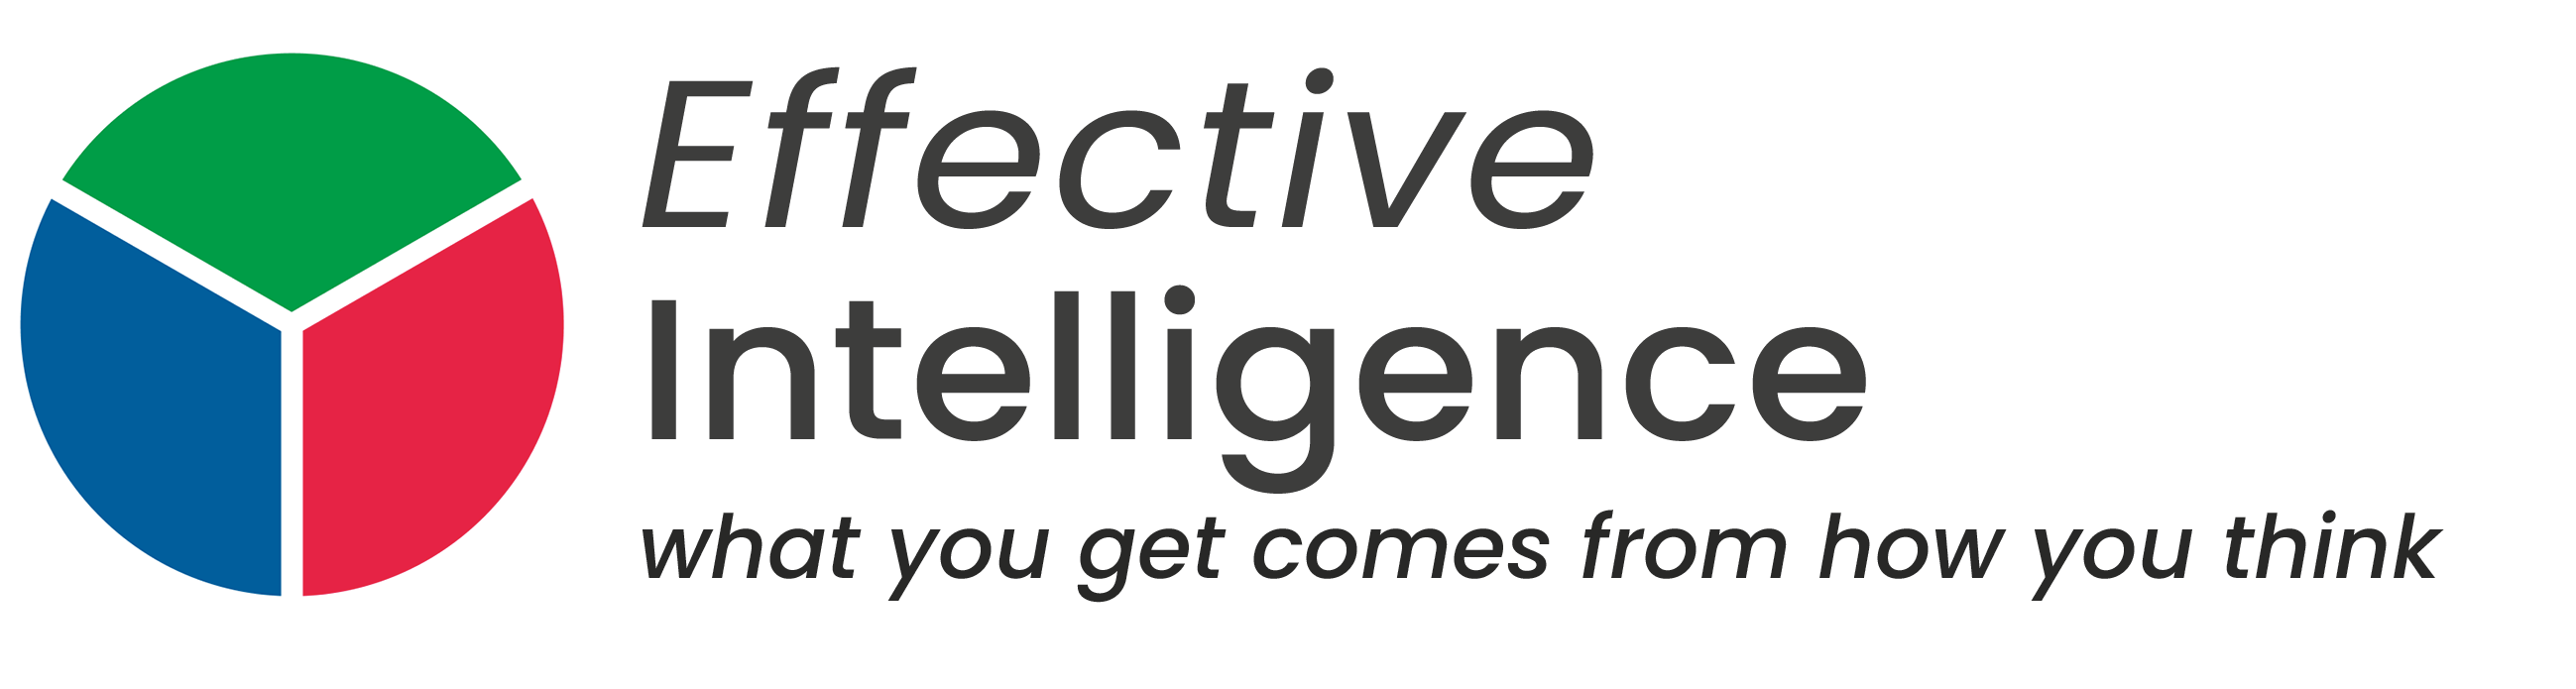 Logo of Effective Intelligence (A circle split into three coloured sections of Green, Red and Blue). Accompanied by text (Effective Intelligence: What You Get Comes From How You Think)